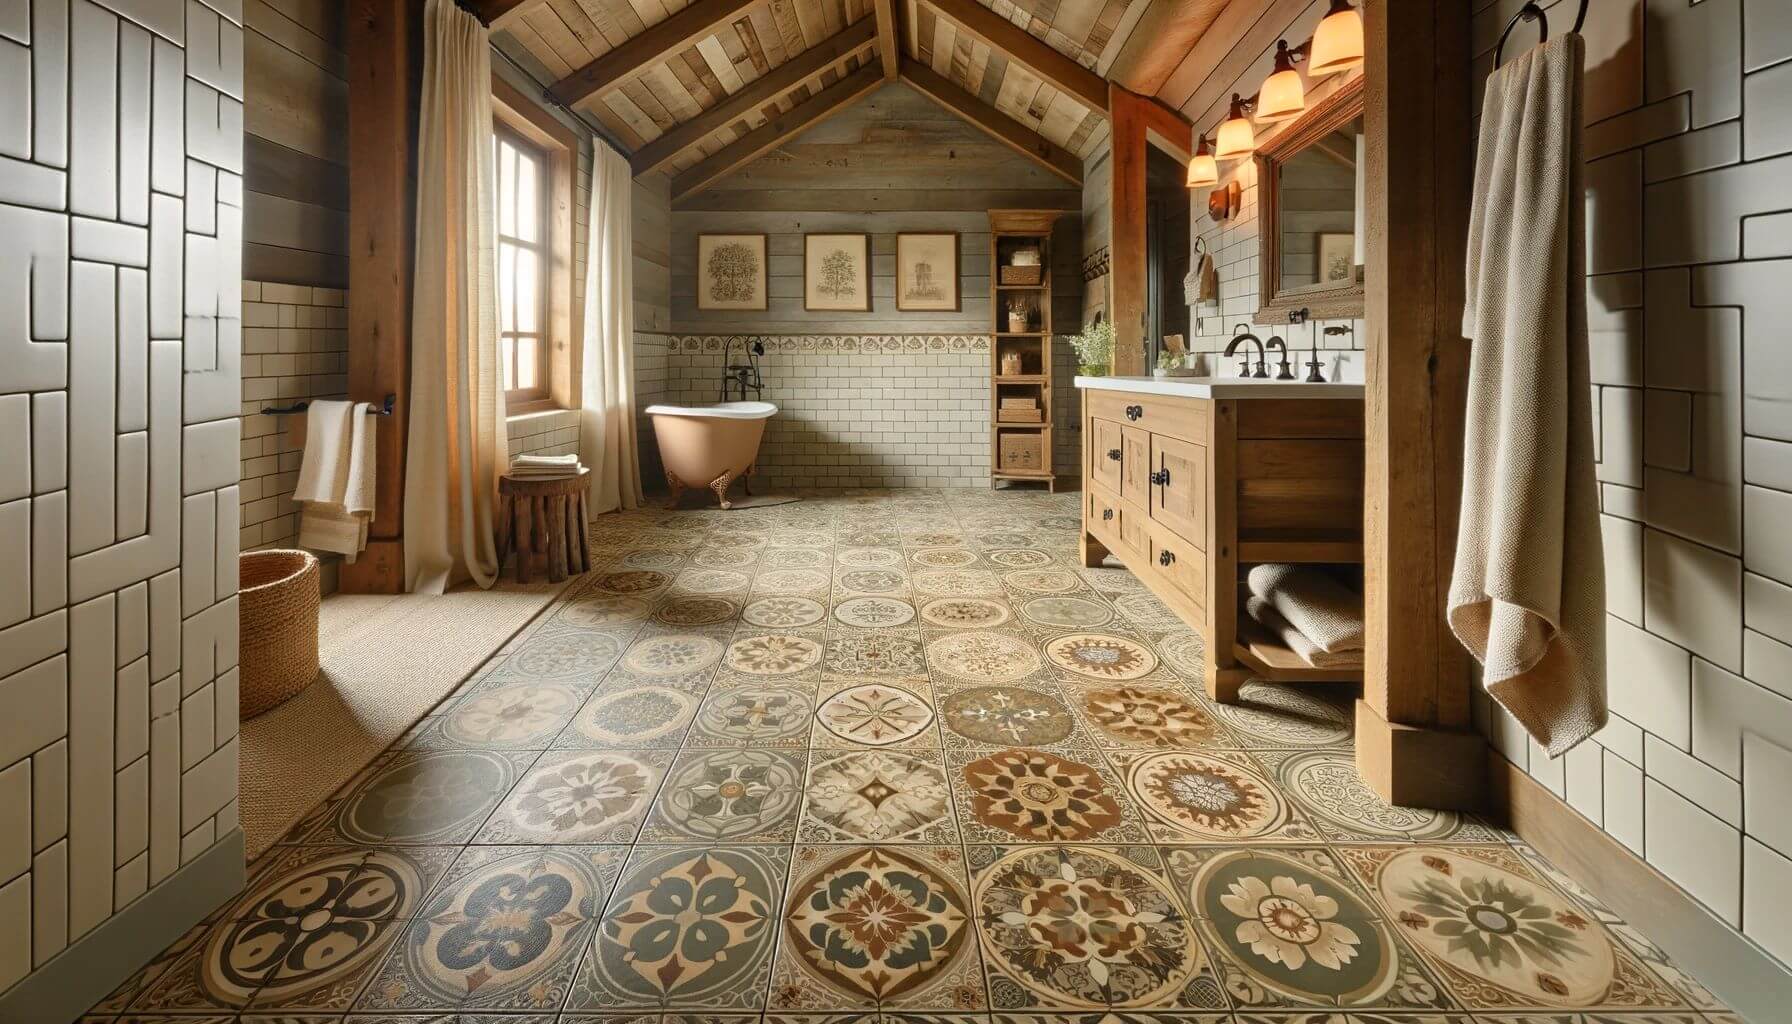 A farmhouse master bathroom with patterned floor tiles